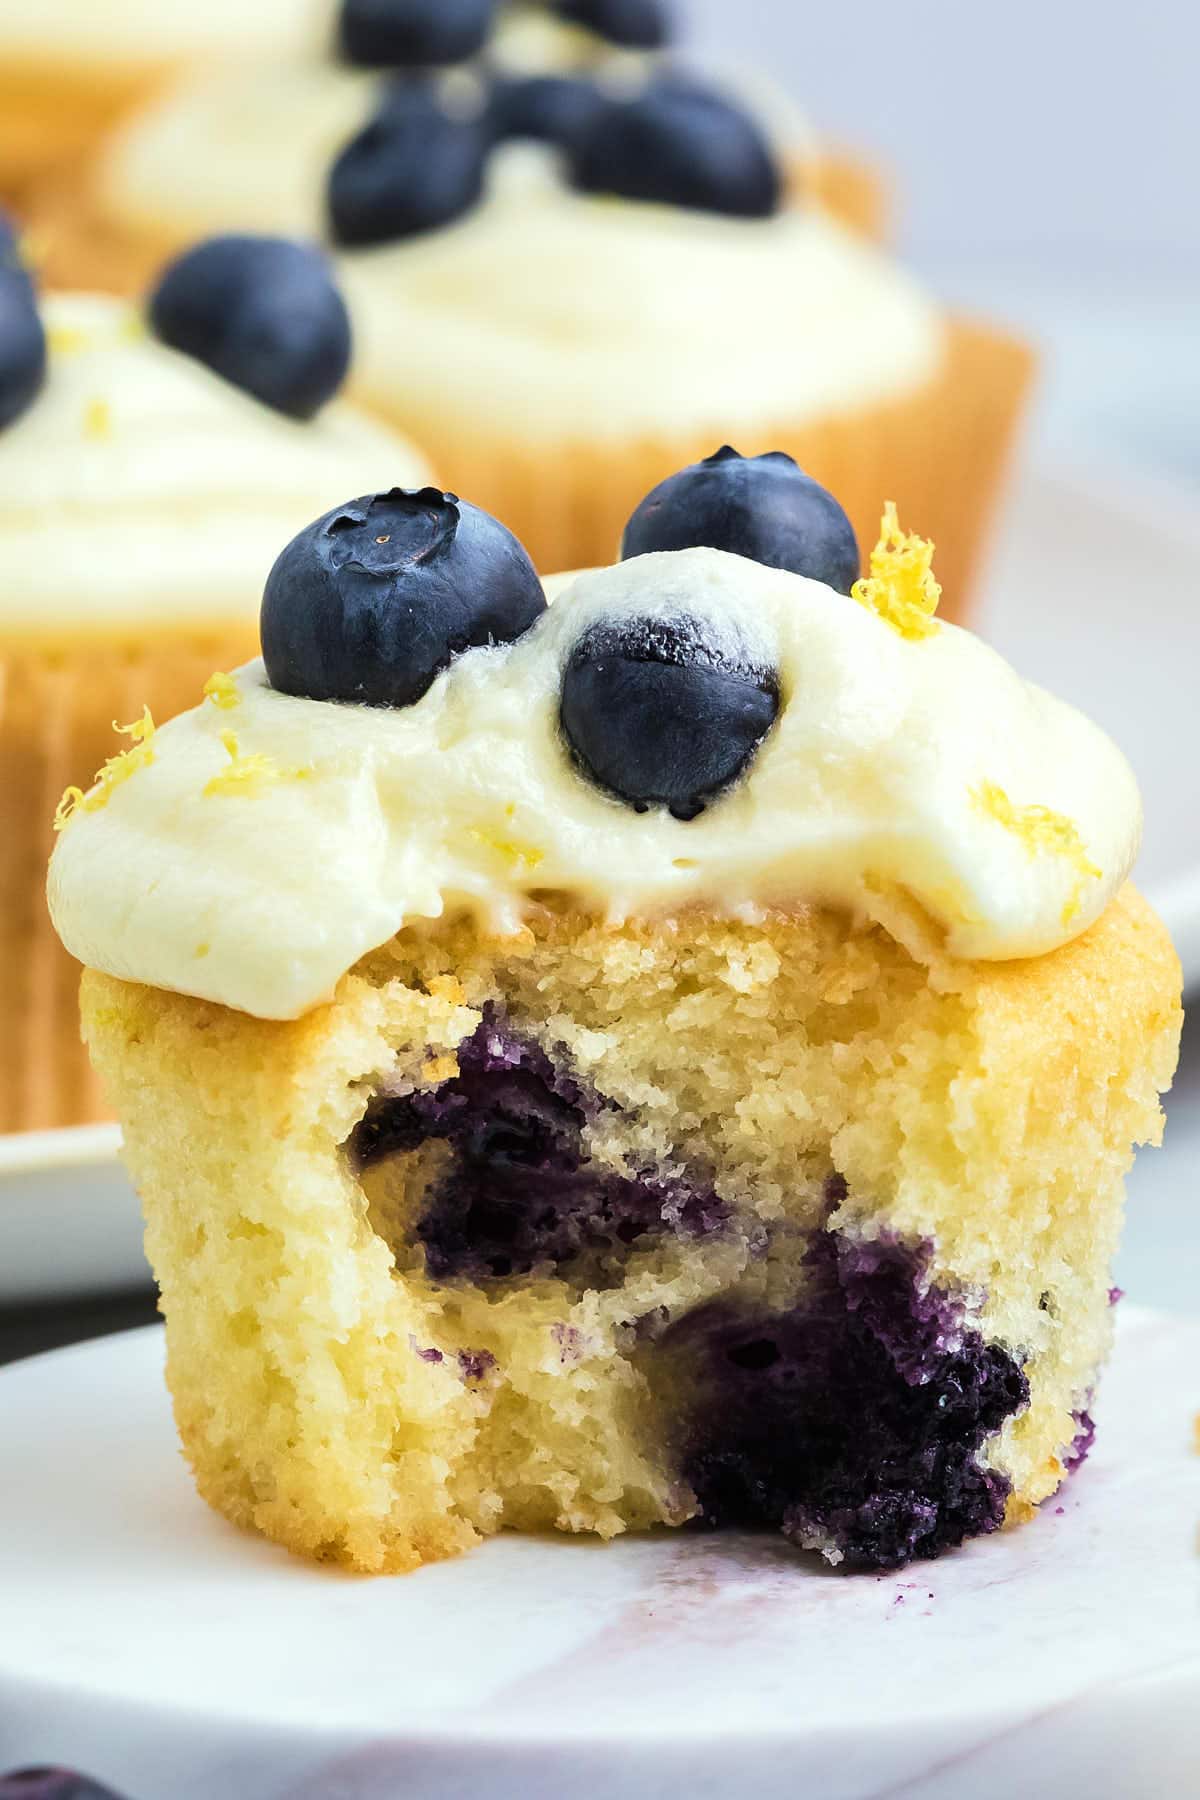 Lemon Blueberry Cupcakes with a bite taken out of them.